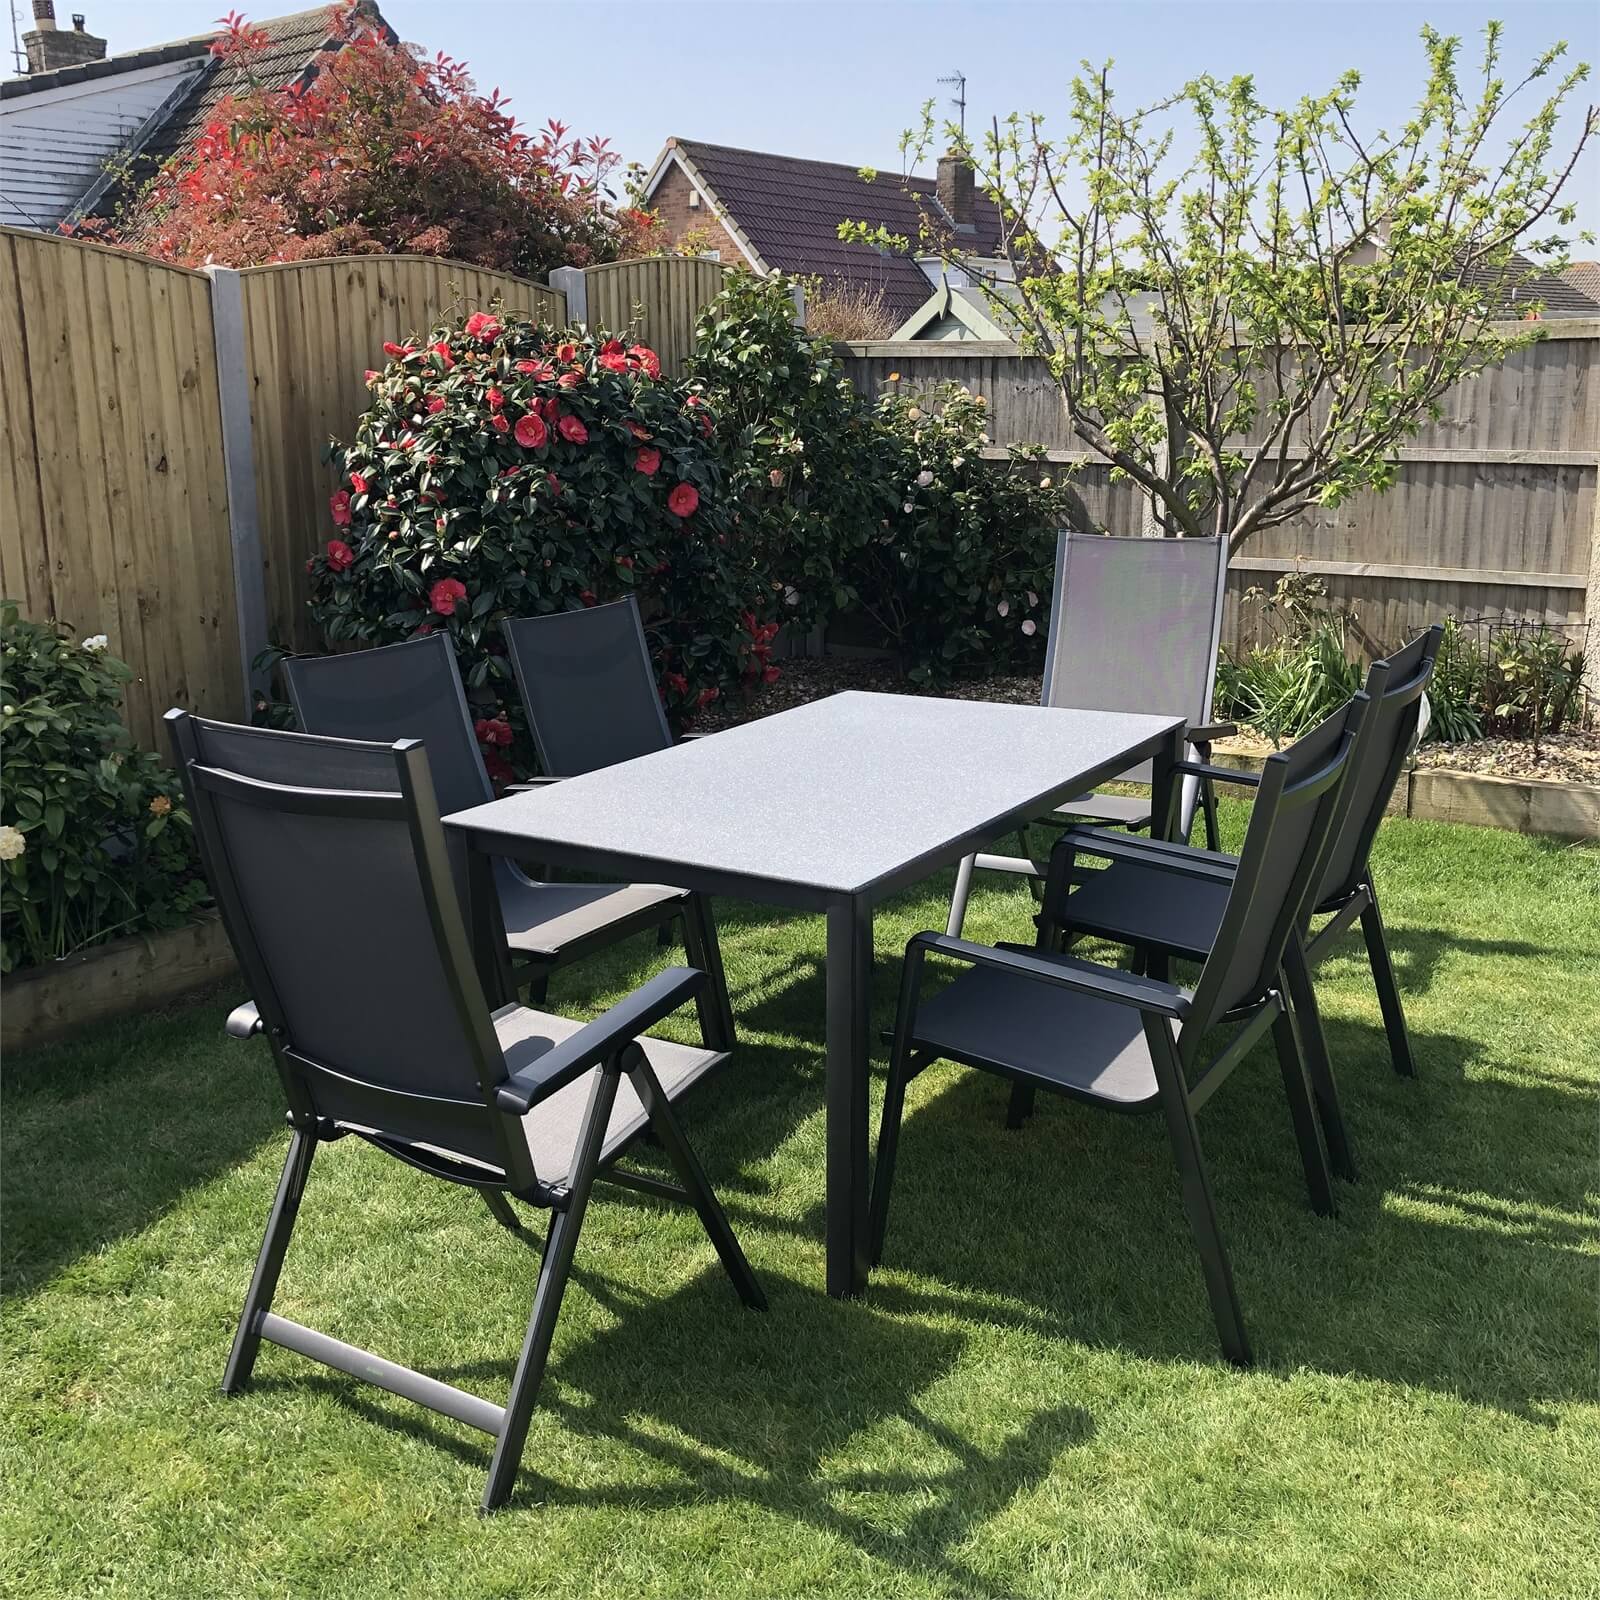 Mwh Elements 6 Seater Metal Garden Furniture in Anthracite